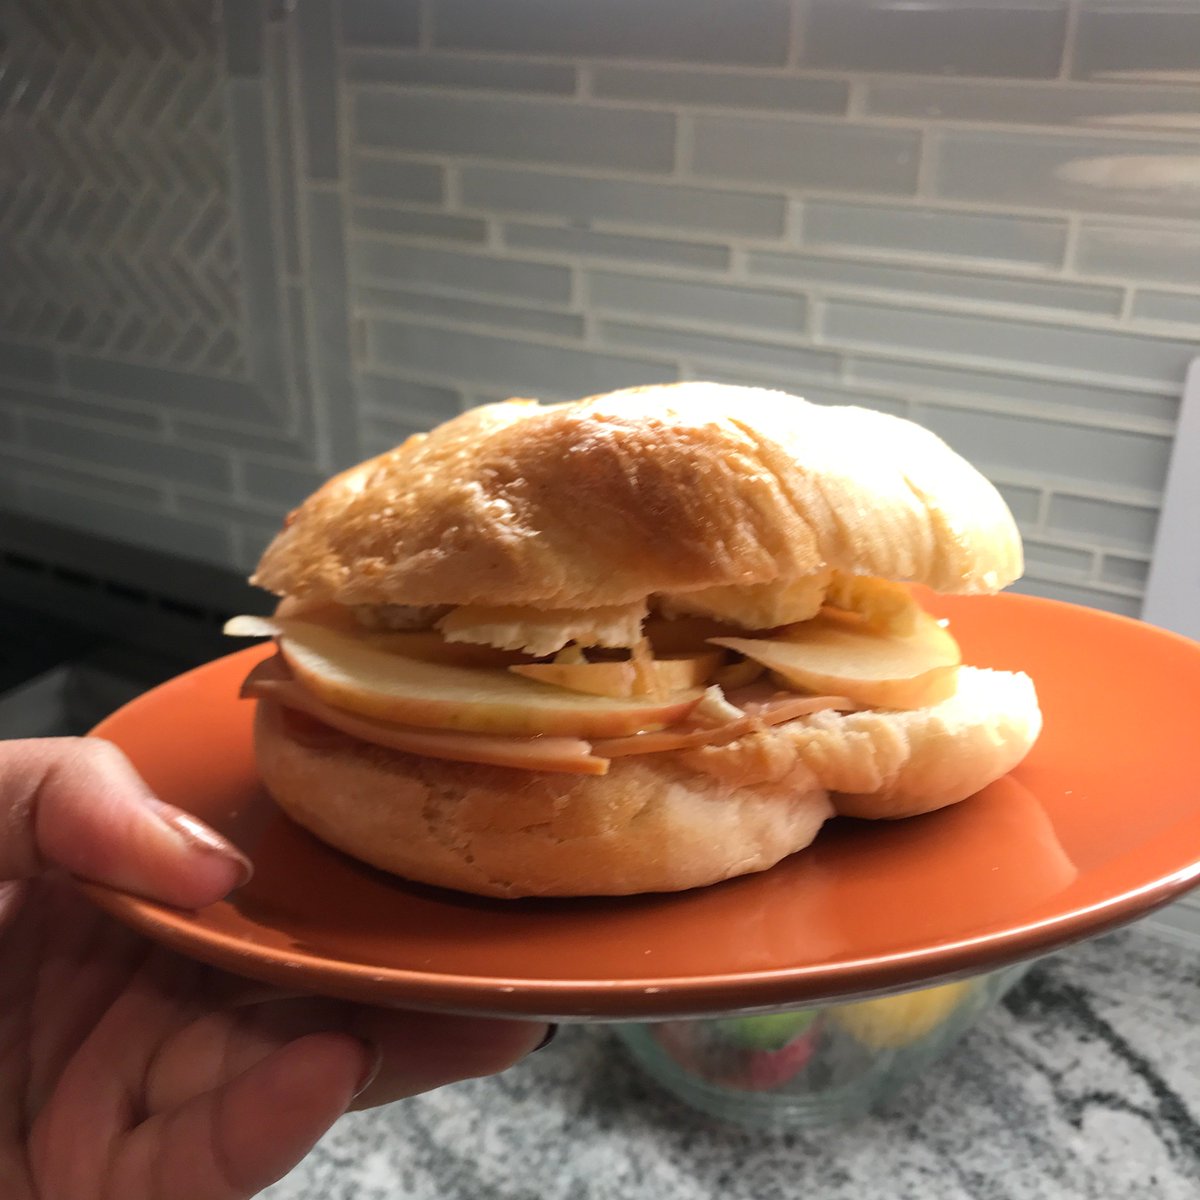 Bread #29: Kaiser Rolls. these were cool! as featured in some egg sandwiches and a brie/turkey/apple sandwich. not the most flavorful, but pretty fast and easy, and you, know. I dunno. they're kaiser rolls! they're cool if you need a sandwich on a kaiser roll!